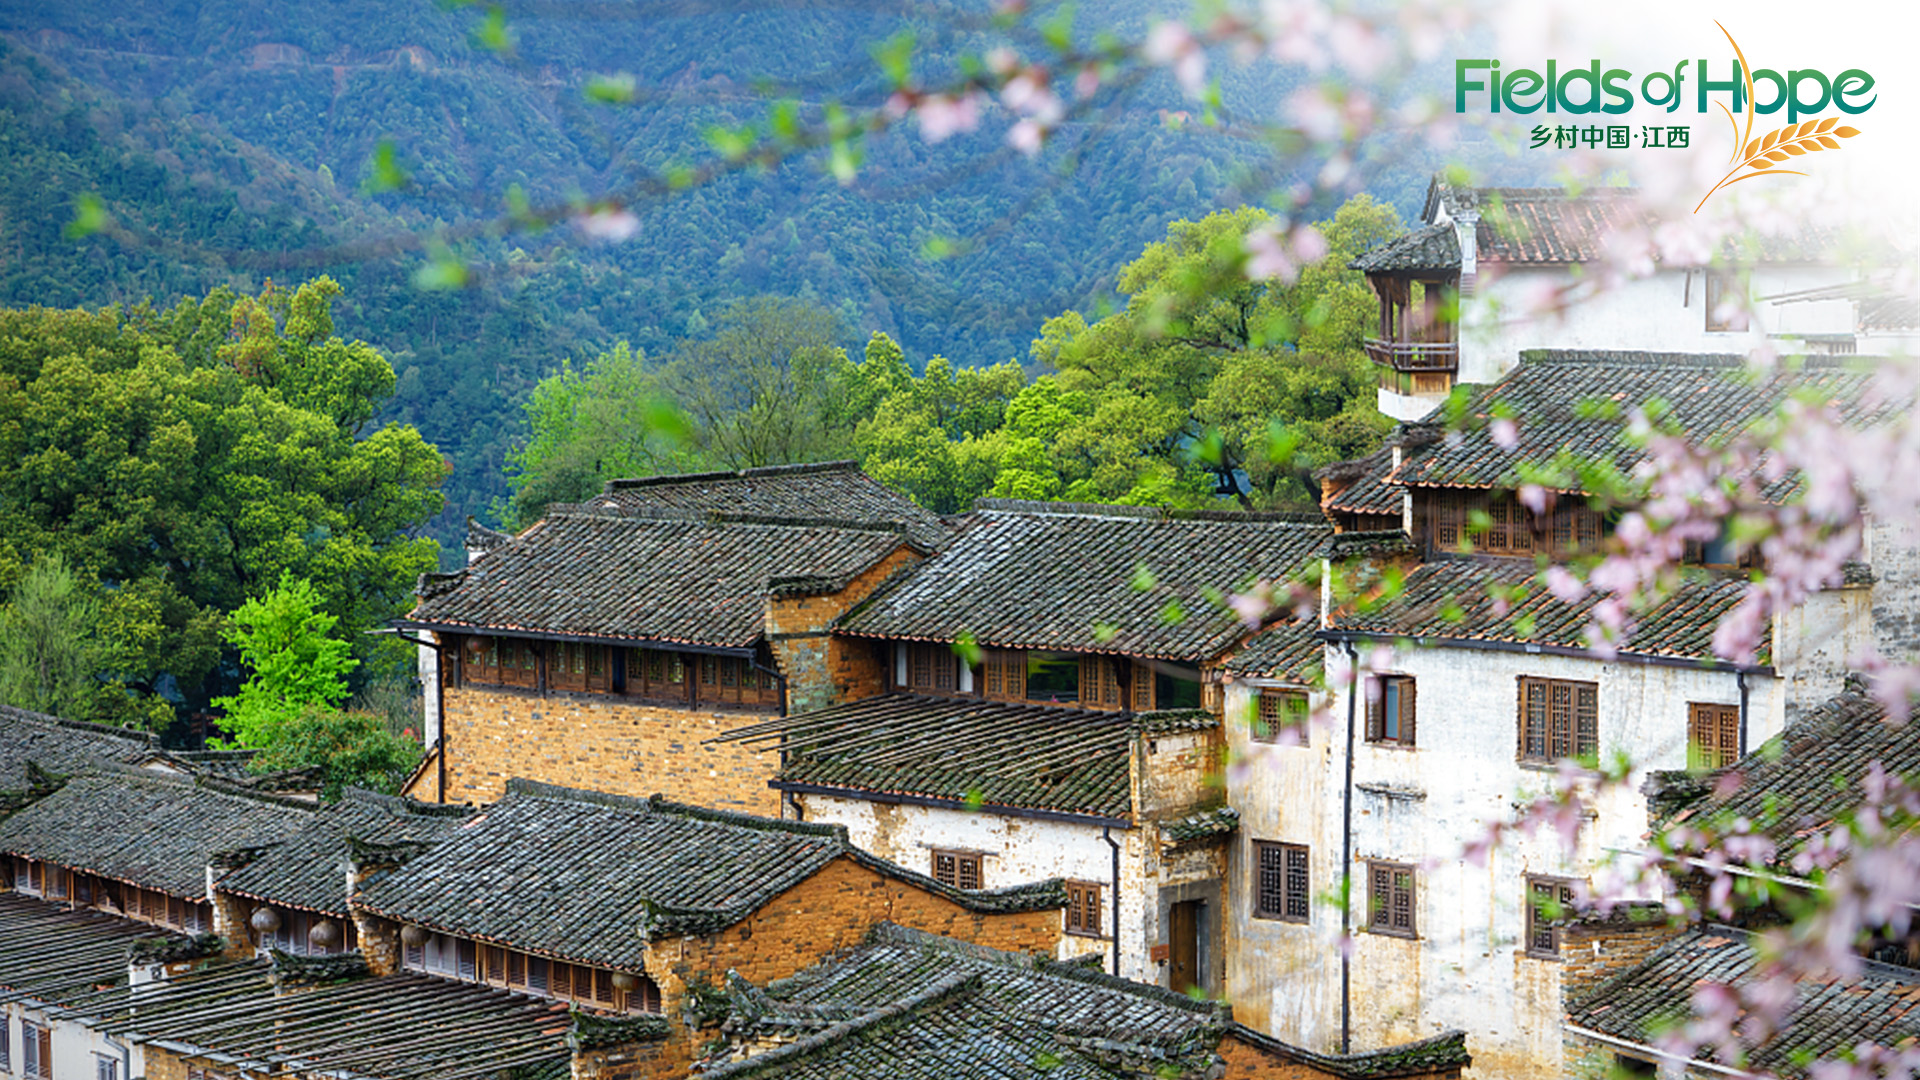 Live: A glimpse of Huangling Village, a pearl enveloped by lush mountains 